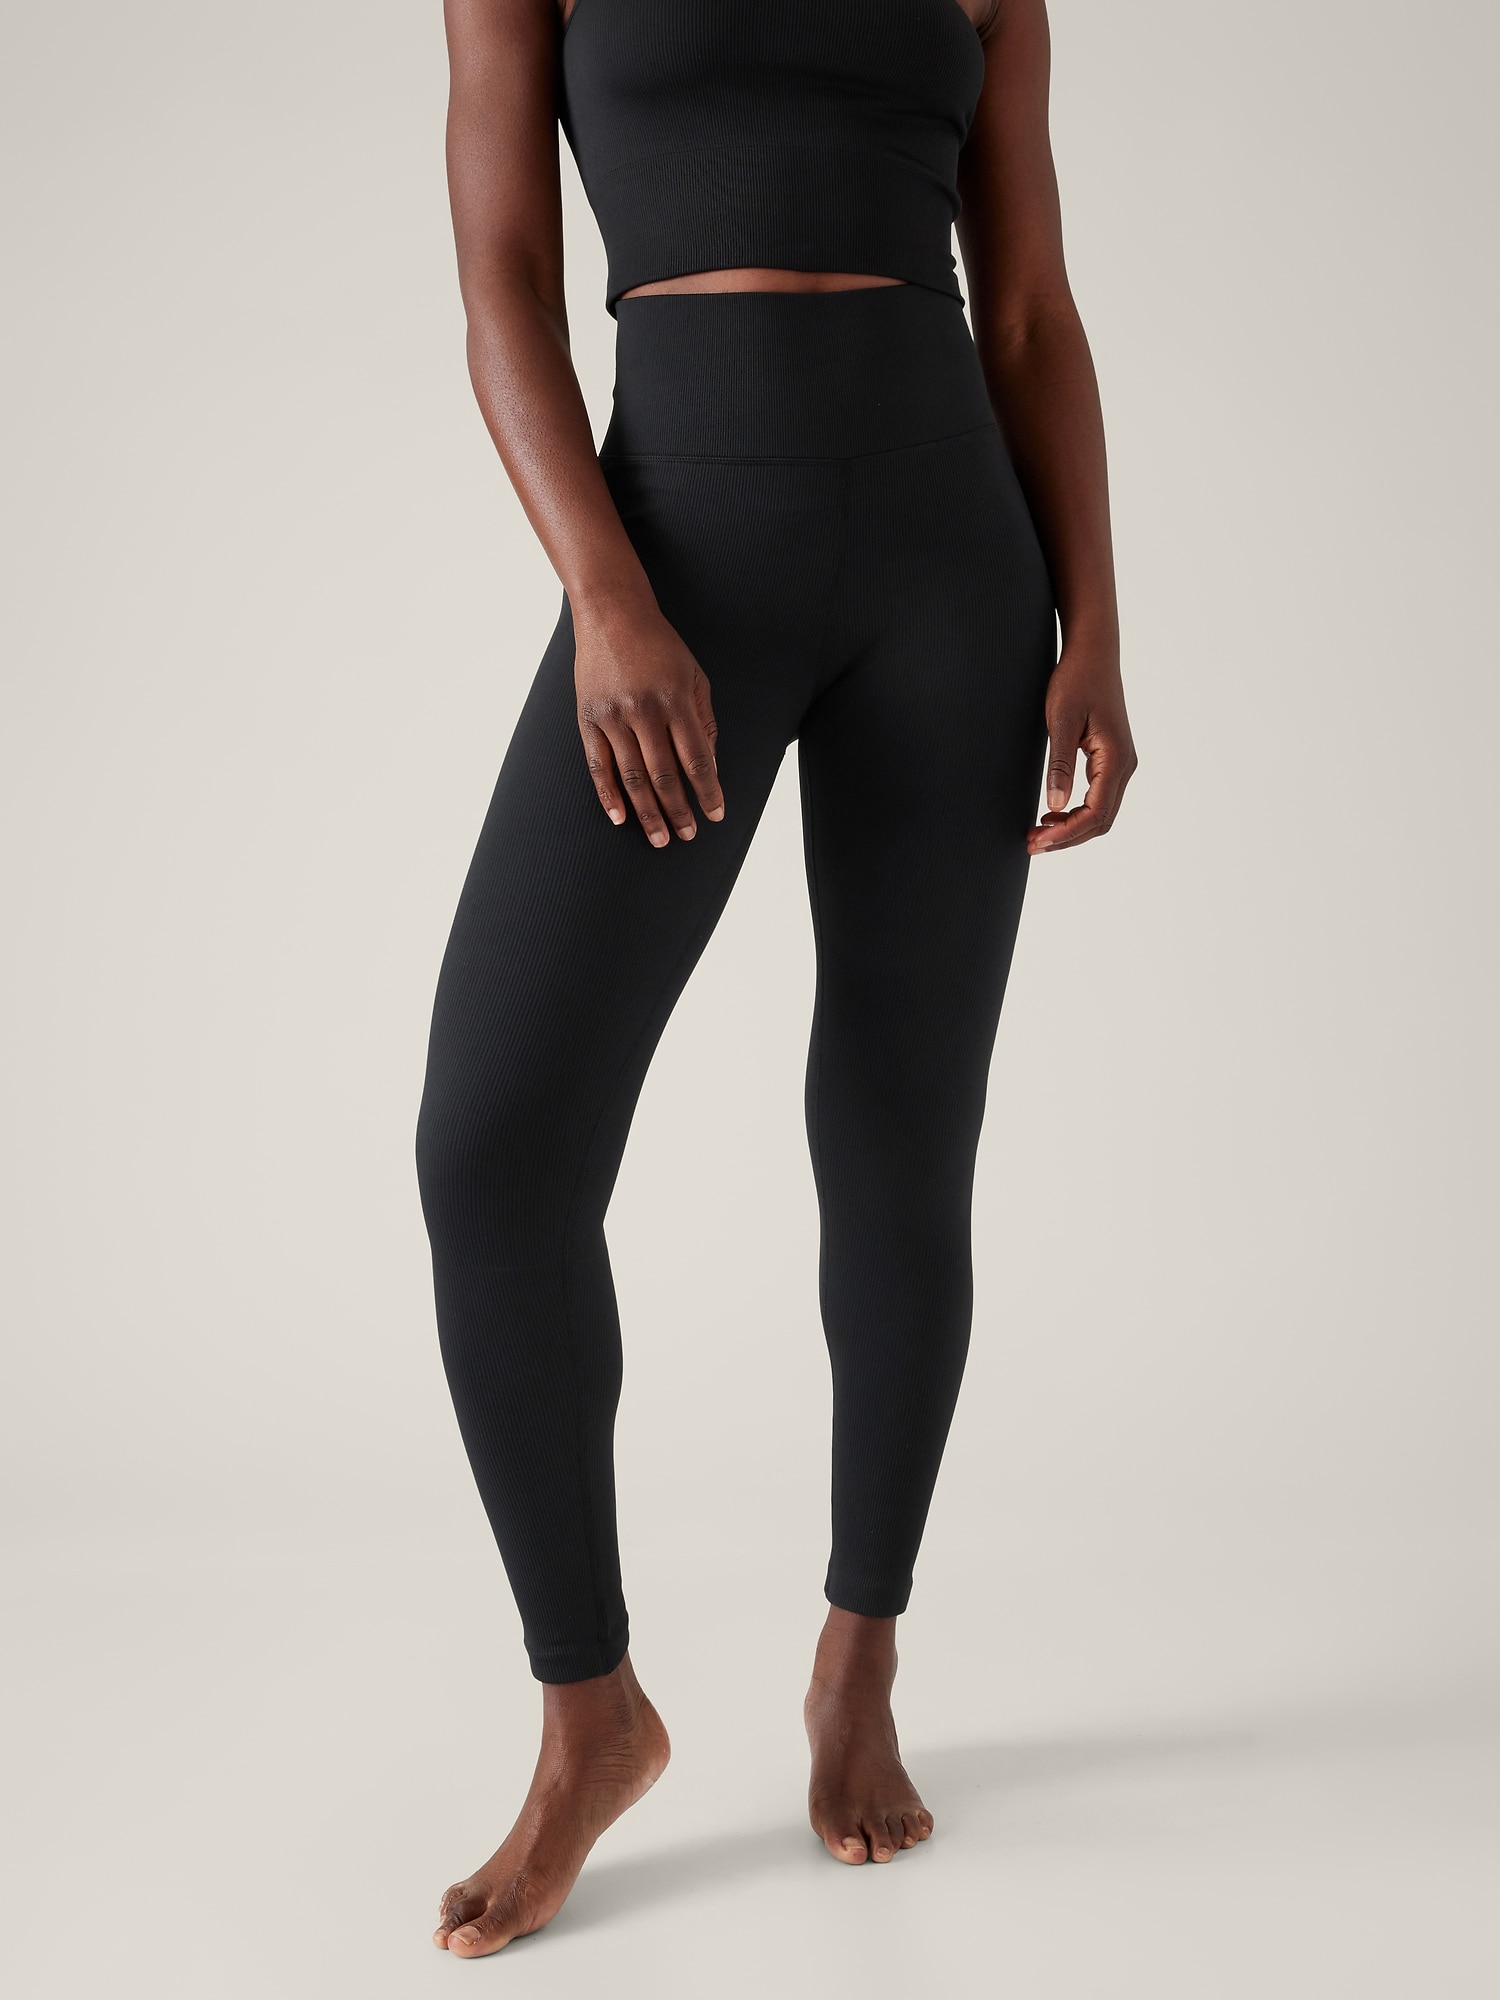 The best plus-size leggings to shop now: Athleta, Terra & Sky and